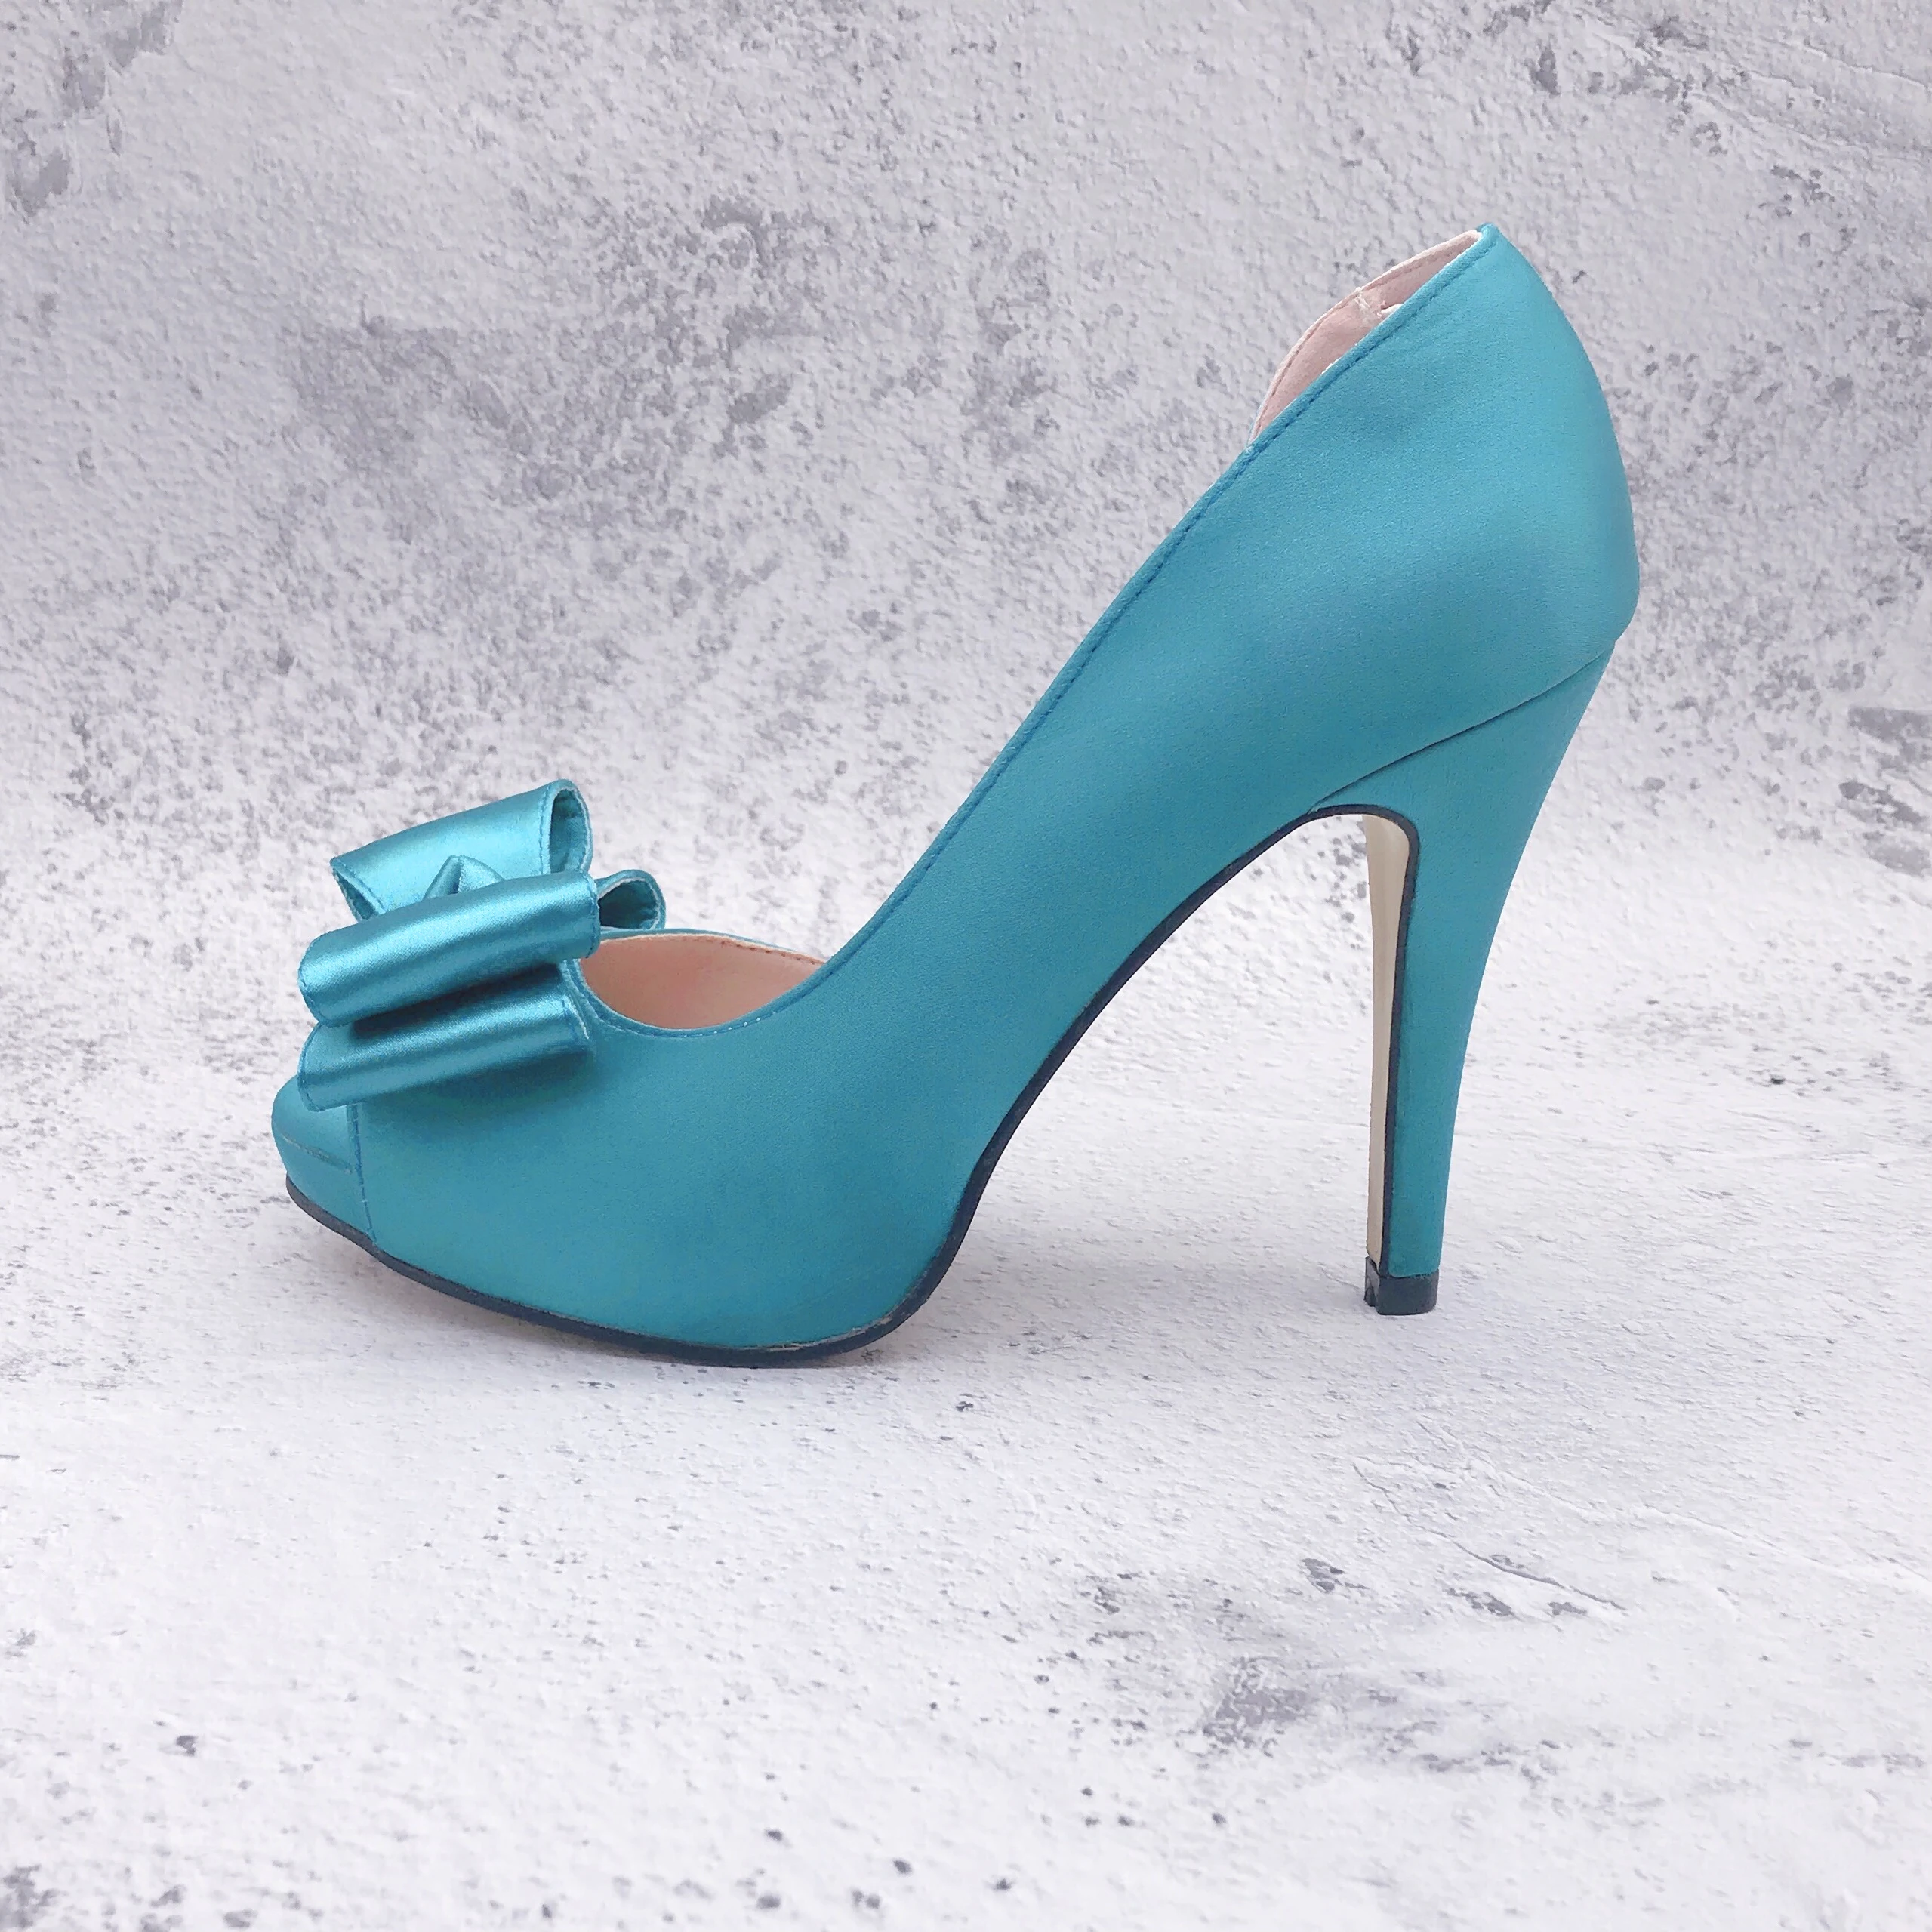 Mint Leaf Heels, Sweet Lace Party & Wedding Shoes from Spool 72 | Spool  No.72